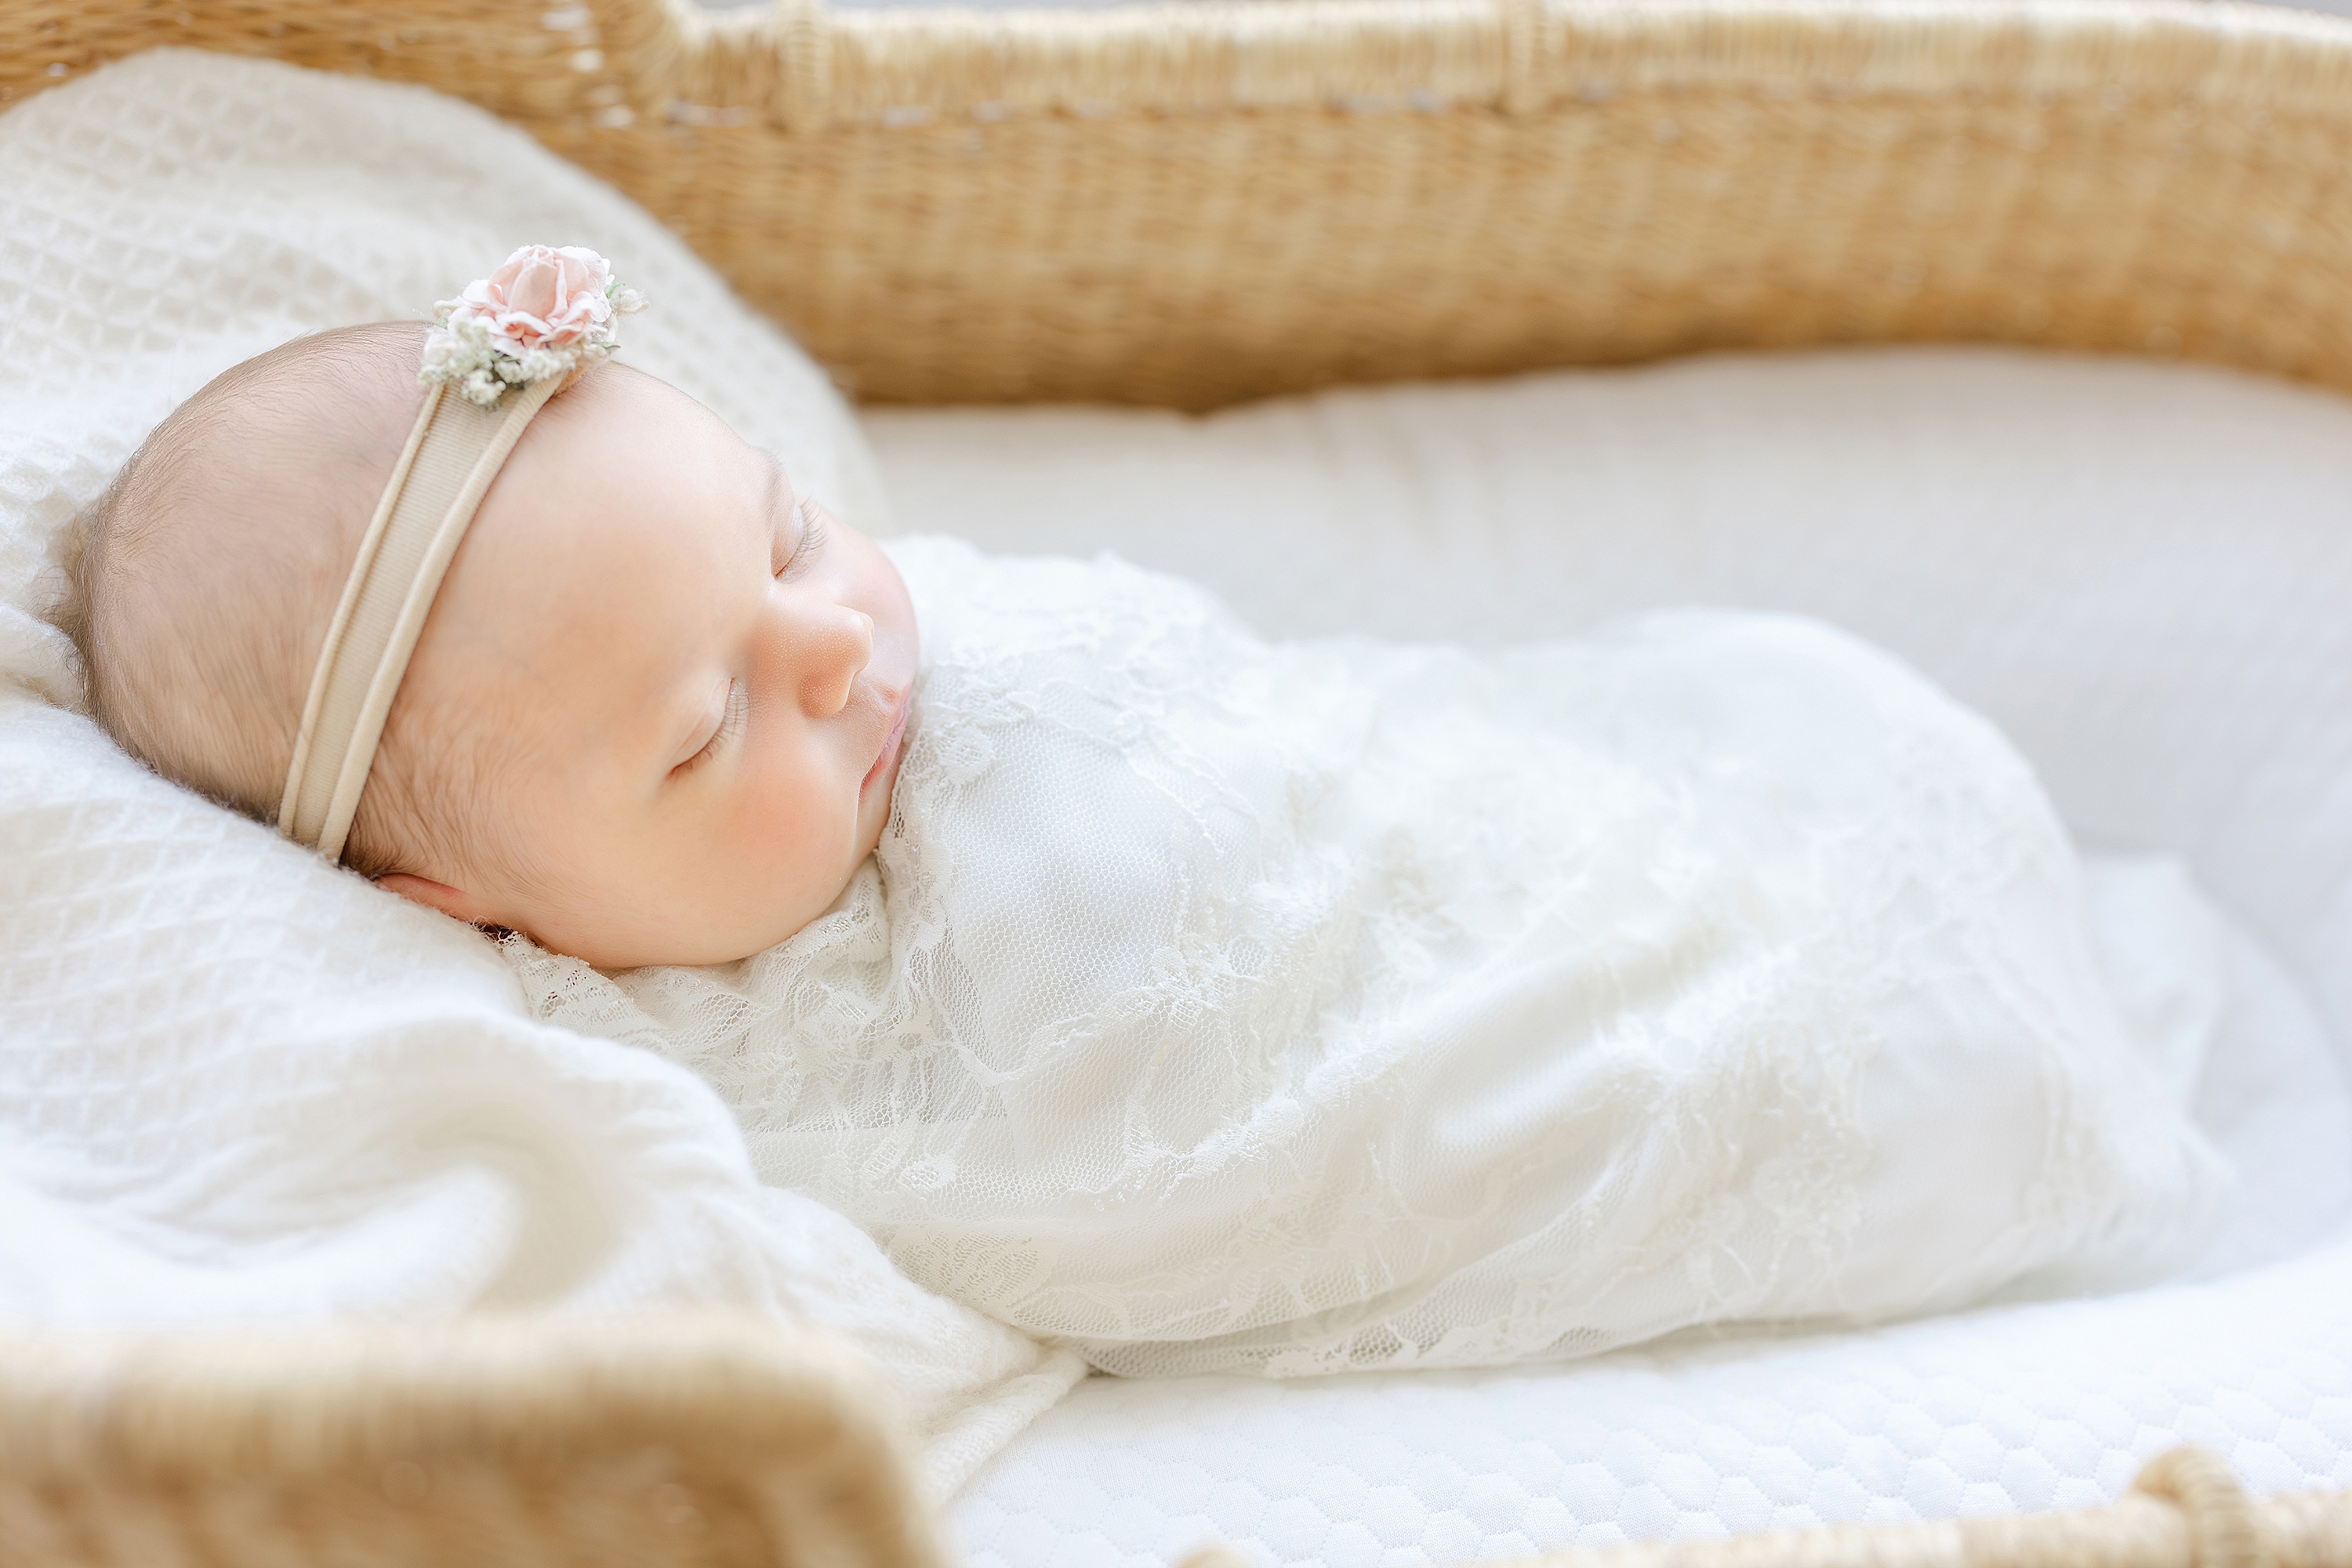 A newborn baby girl wrapped in a lace swaddle in a billy basket.